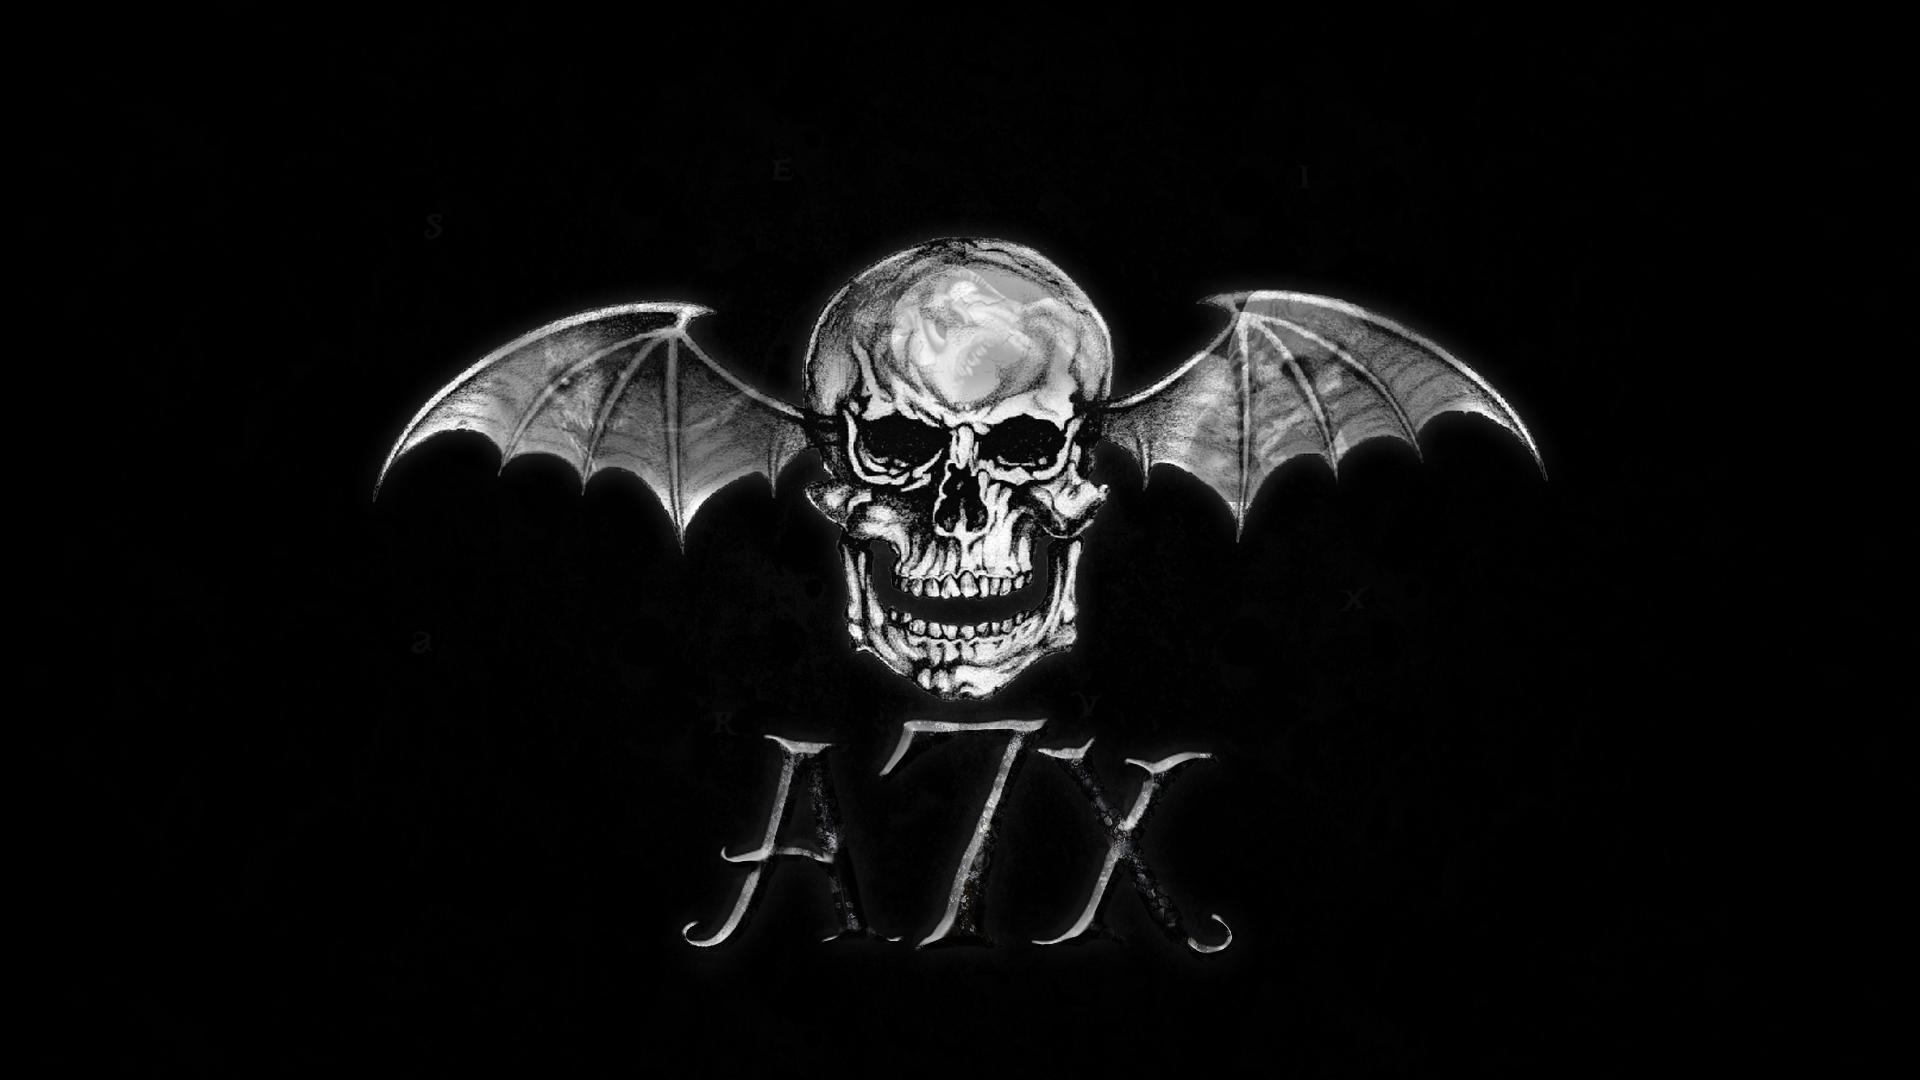 Image For > Avenged Sevenfold Wallpapers 2014